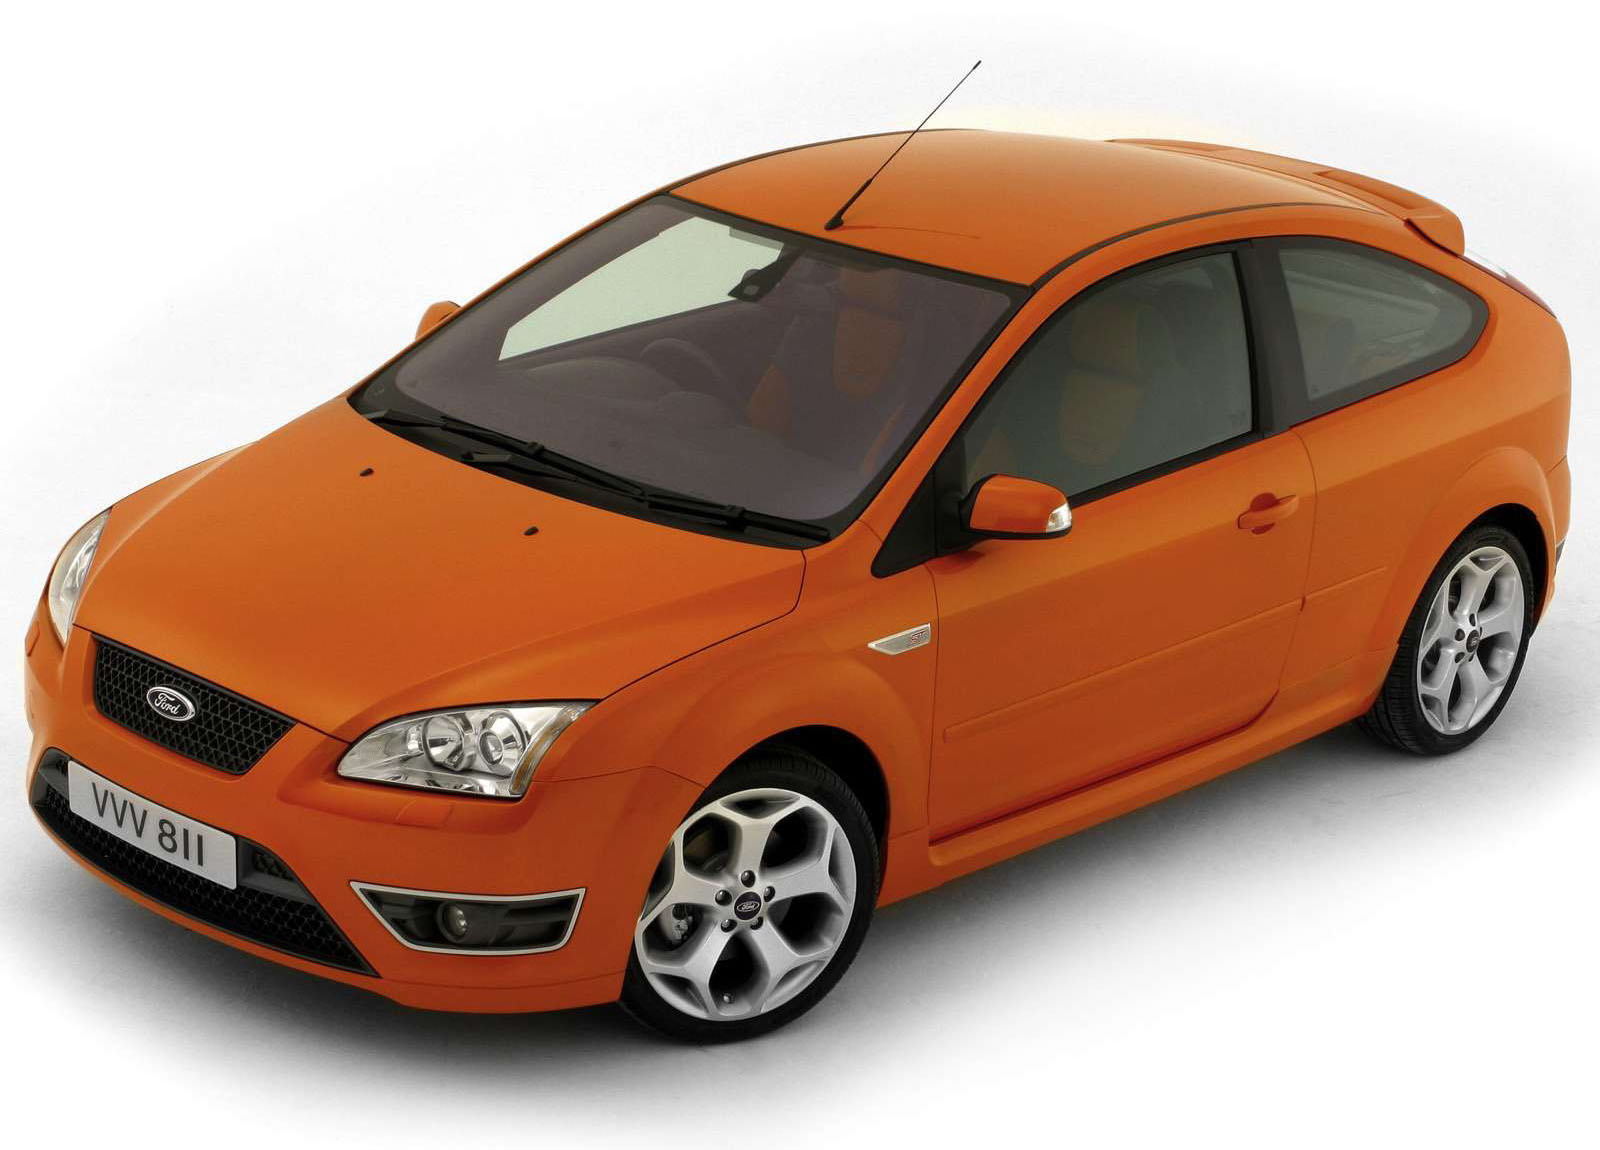 Ford Focus ST photo #2